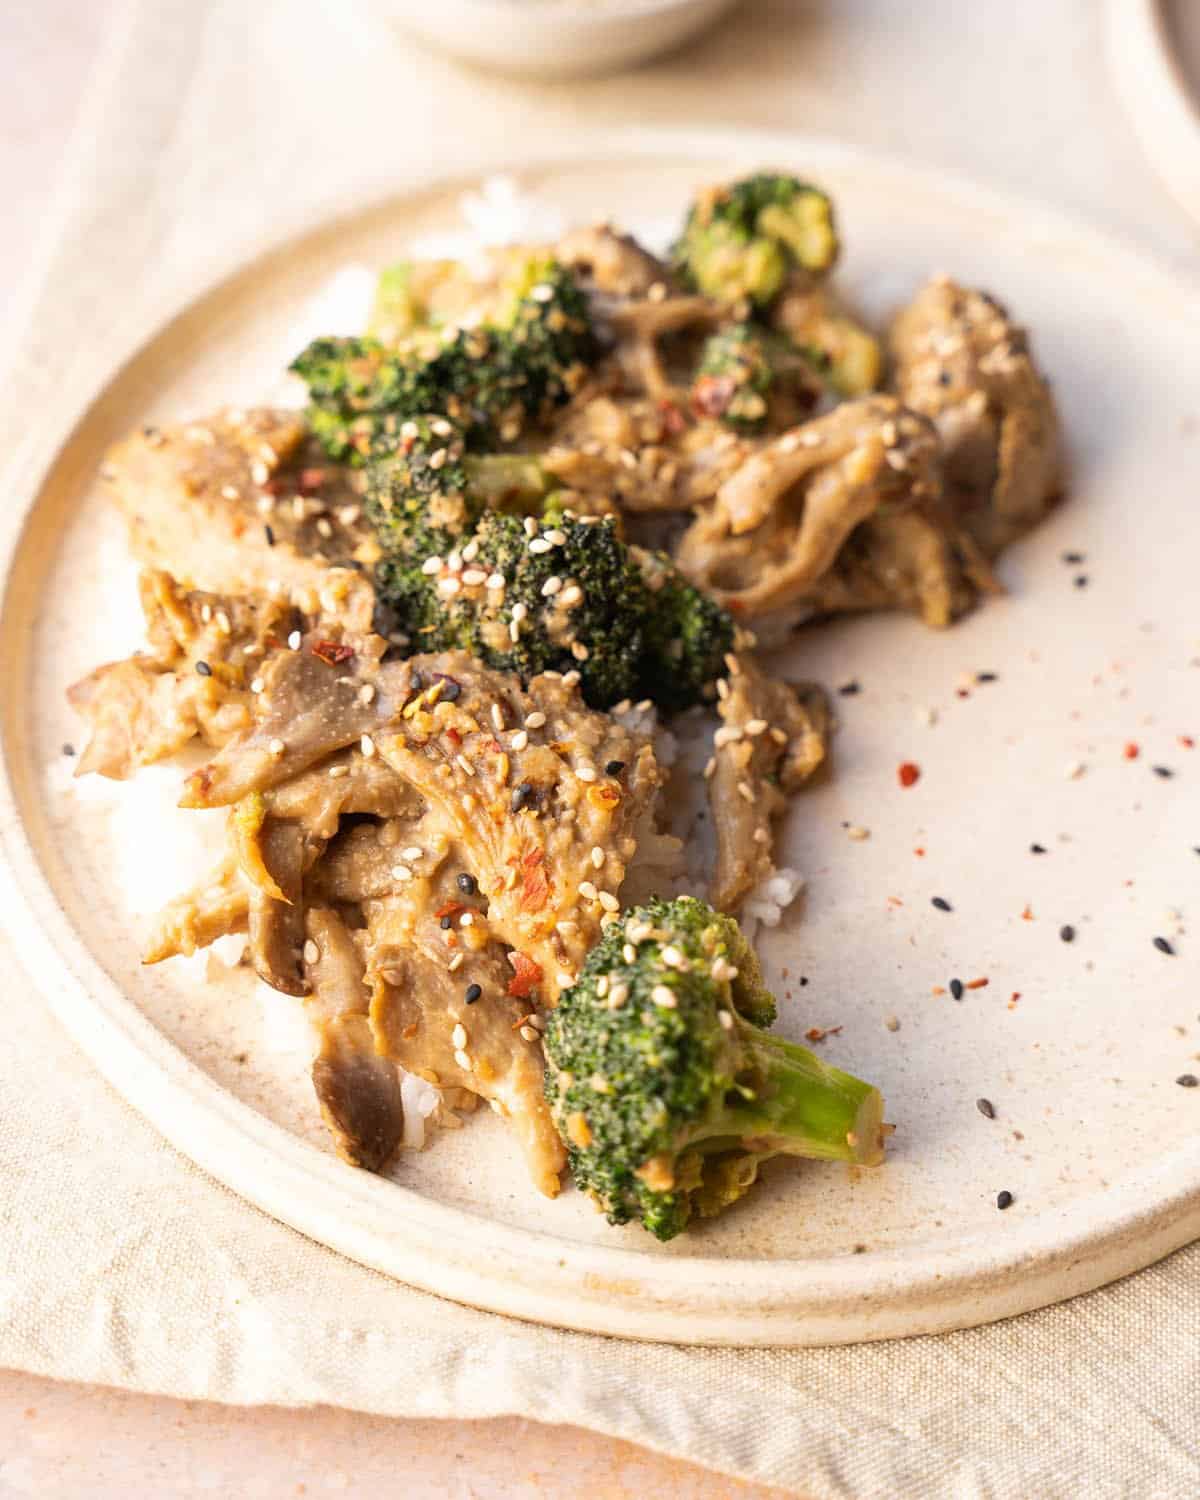 A plate of stir fried oyster mushrooms and broccoli.